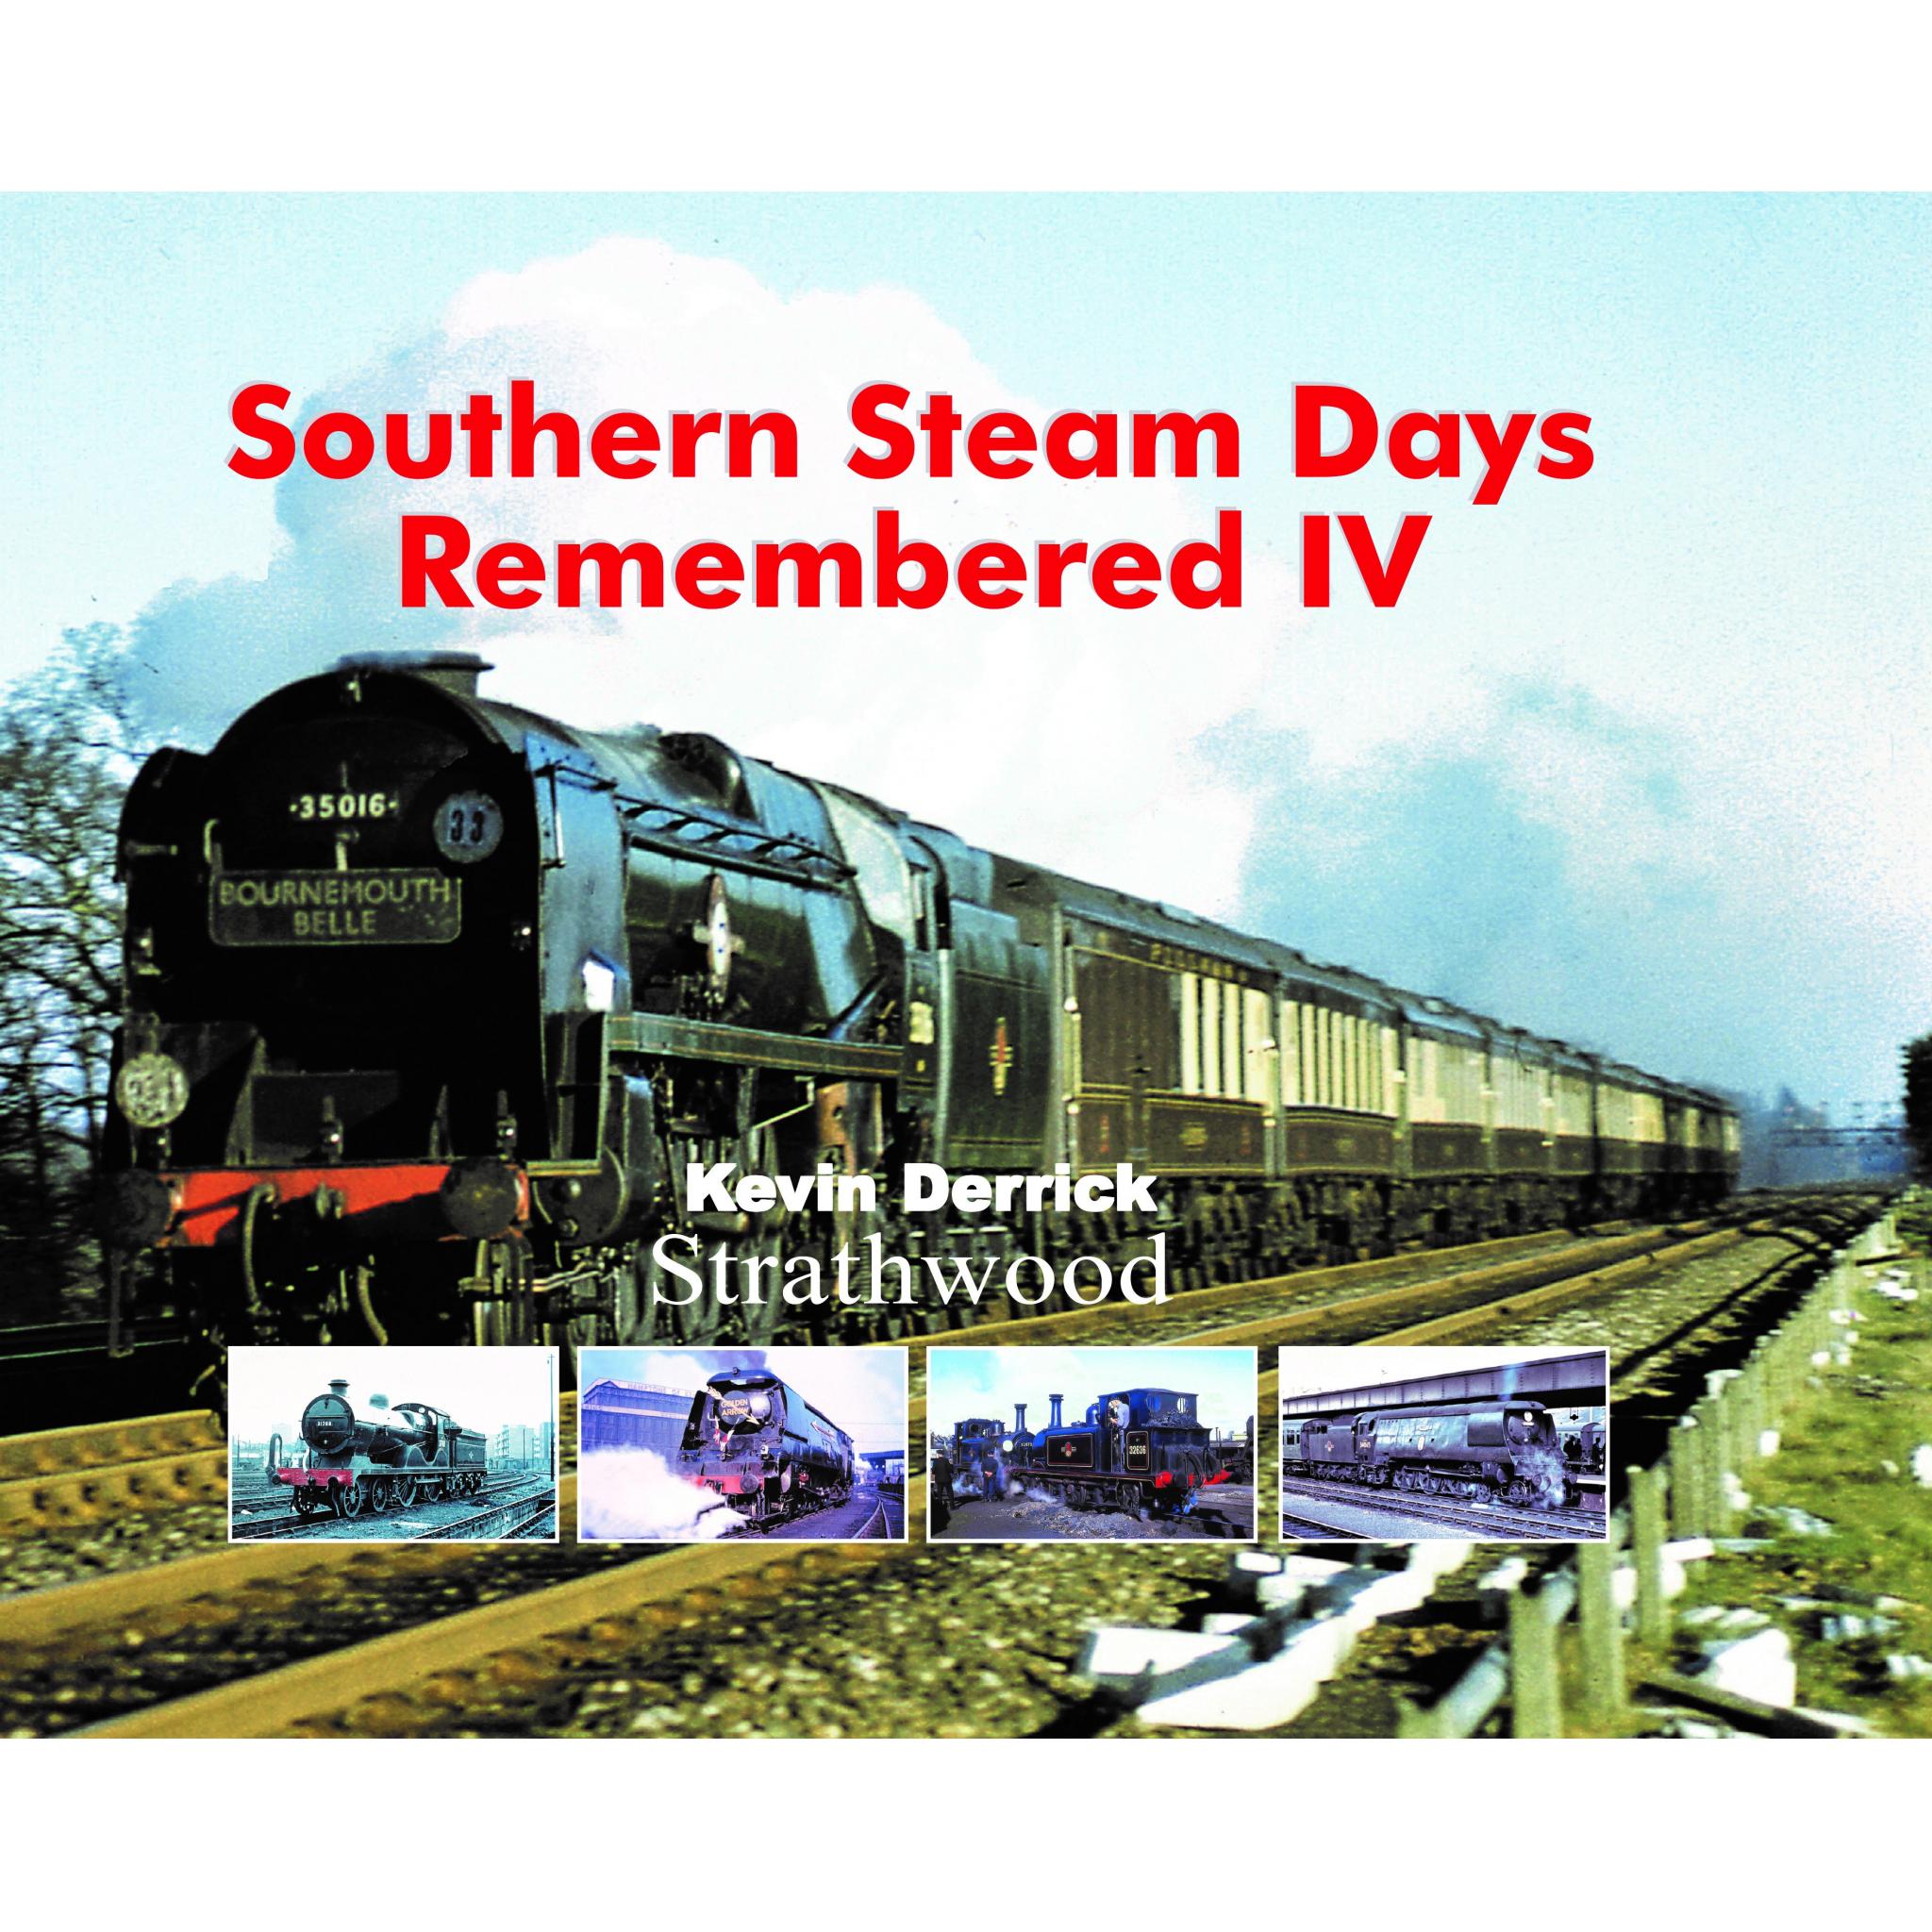 Southern Steam Days Remembered IV